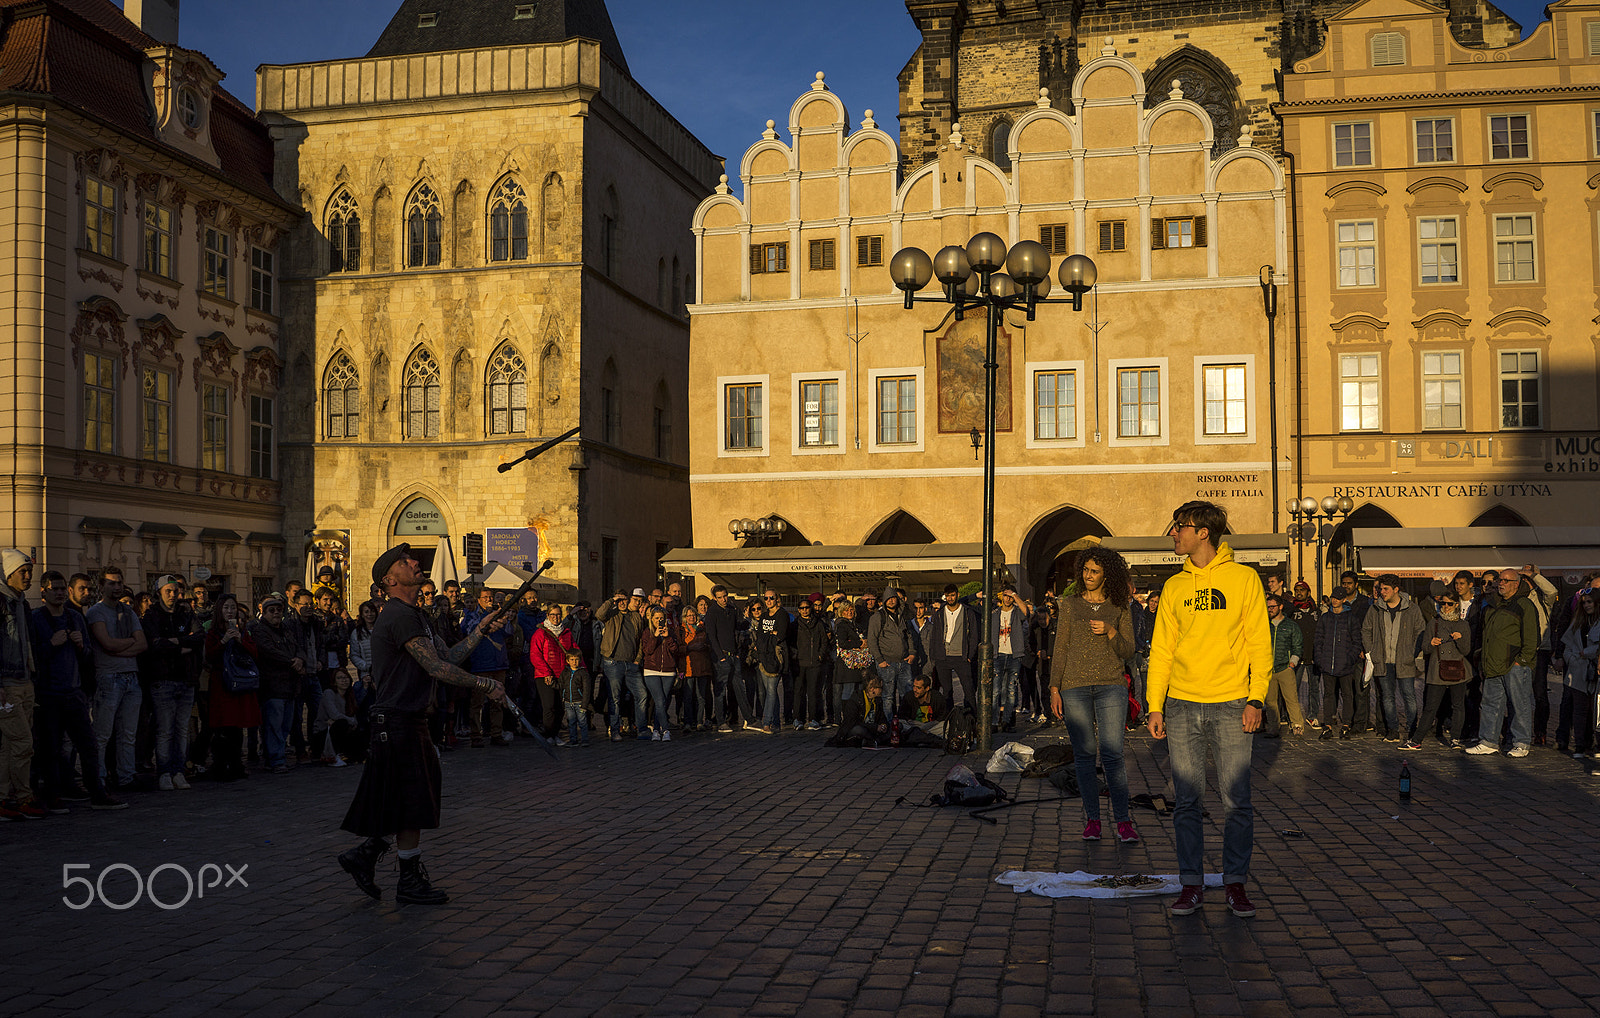 Sony a7R sample photo. The old town square jugglers photography